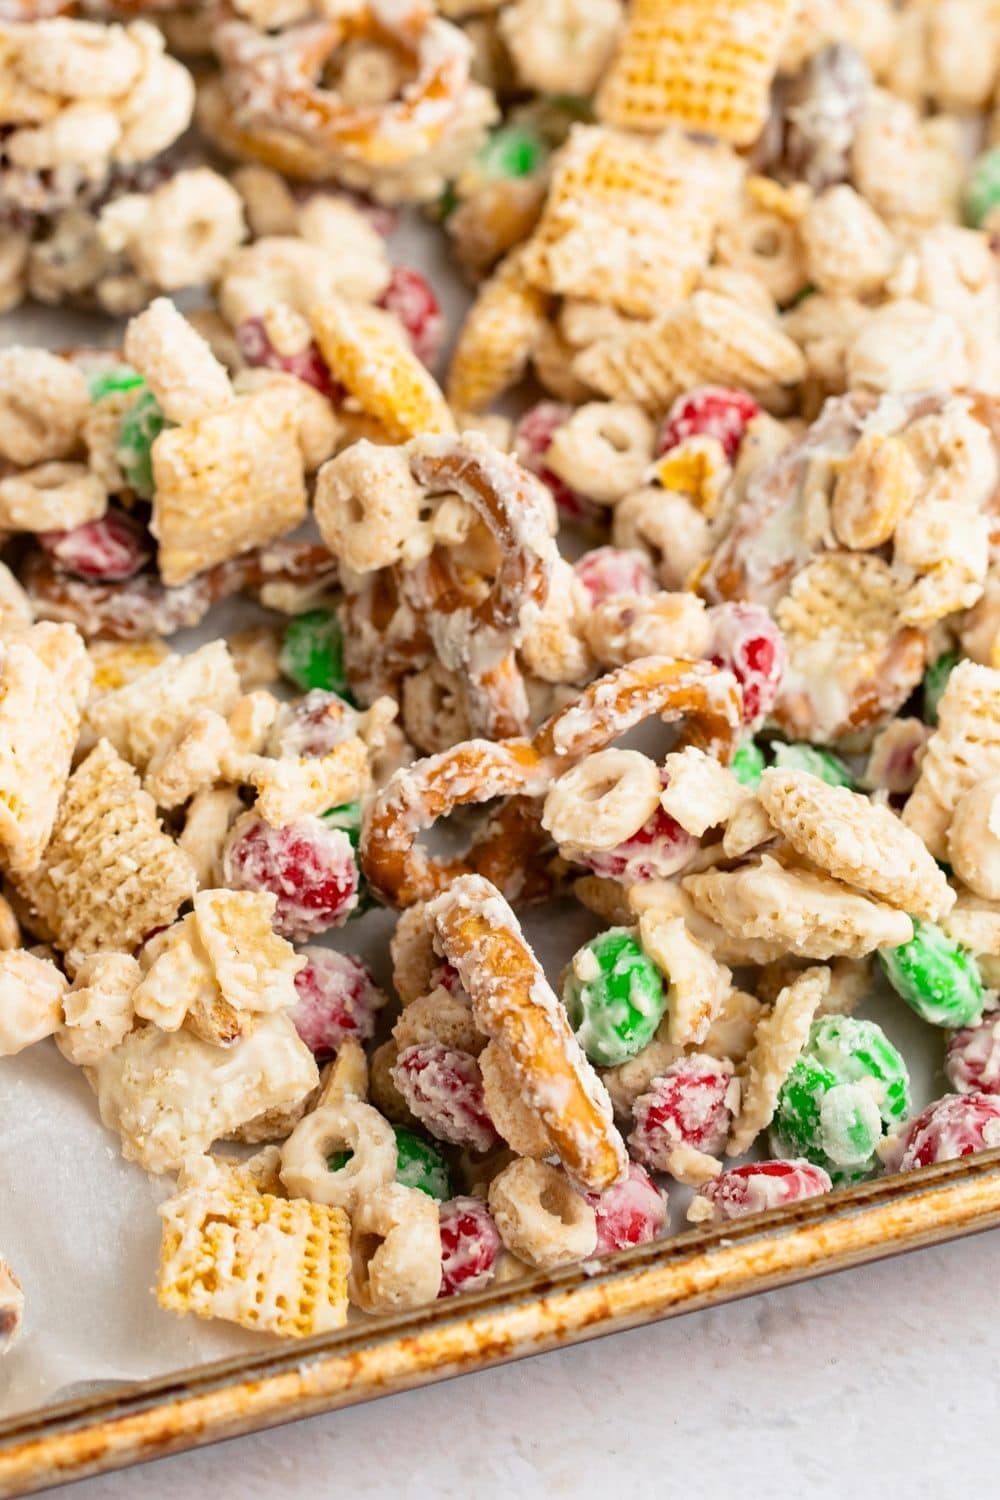 Homemade White Trash Snack Party Mix in a Baking Tray